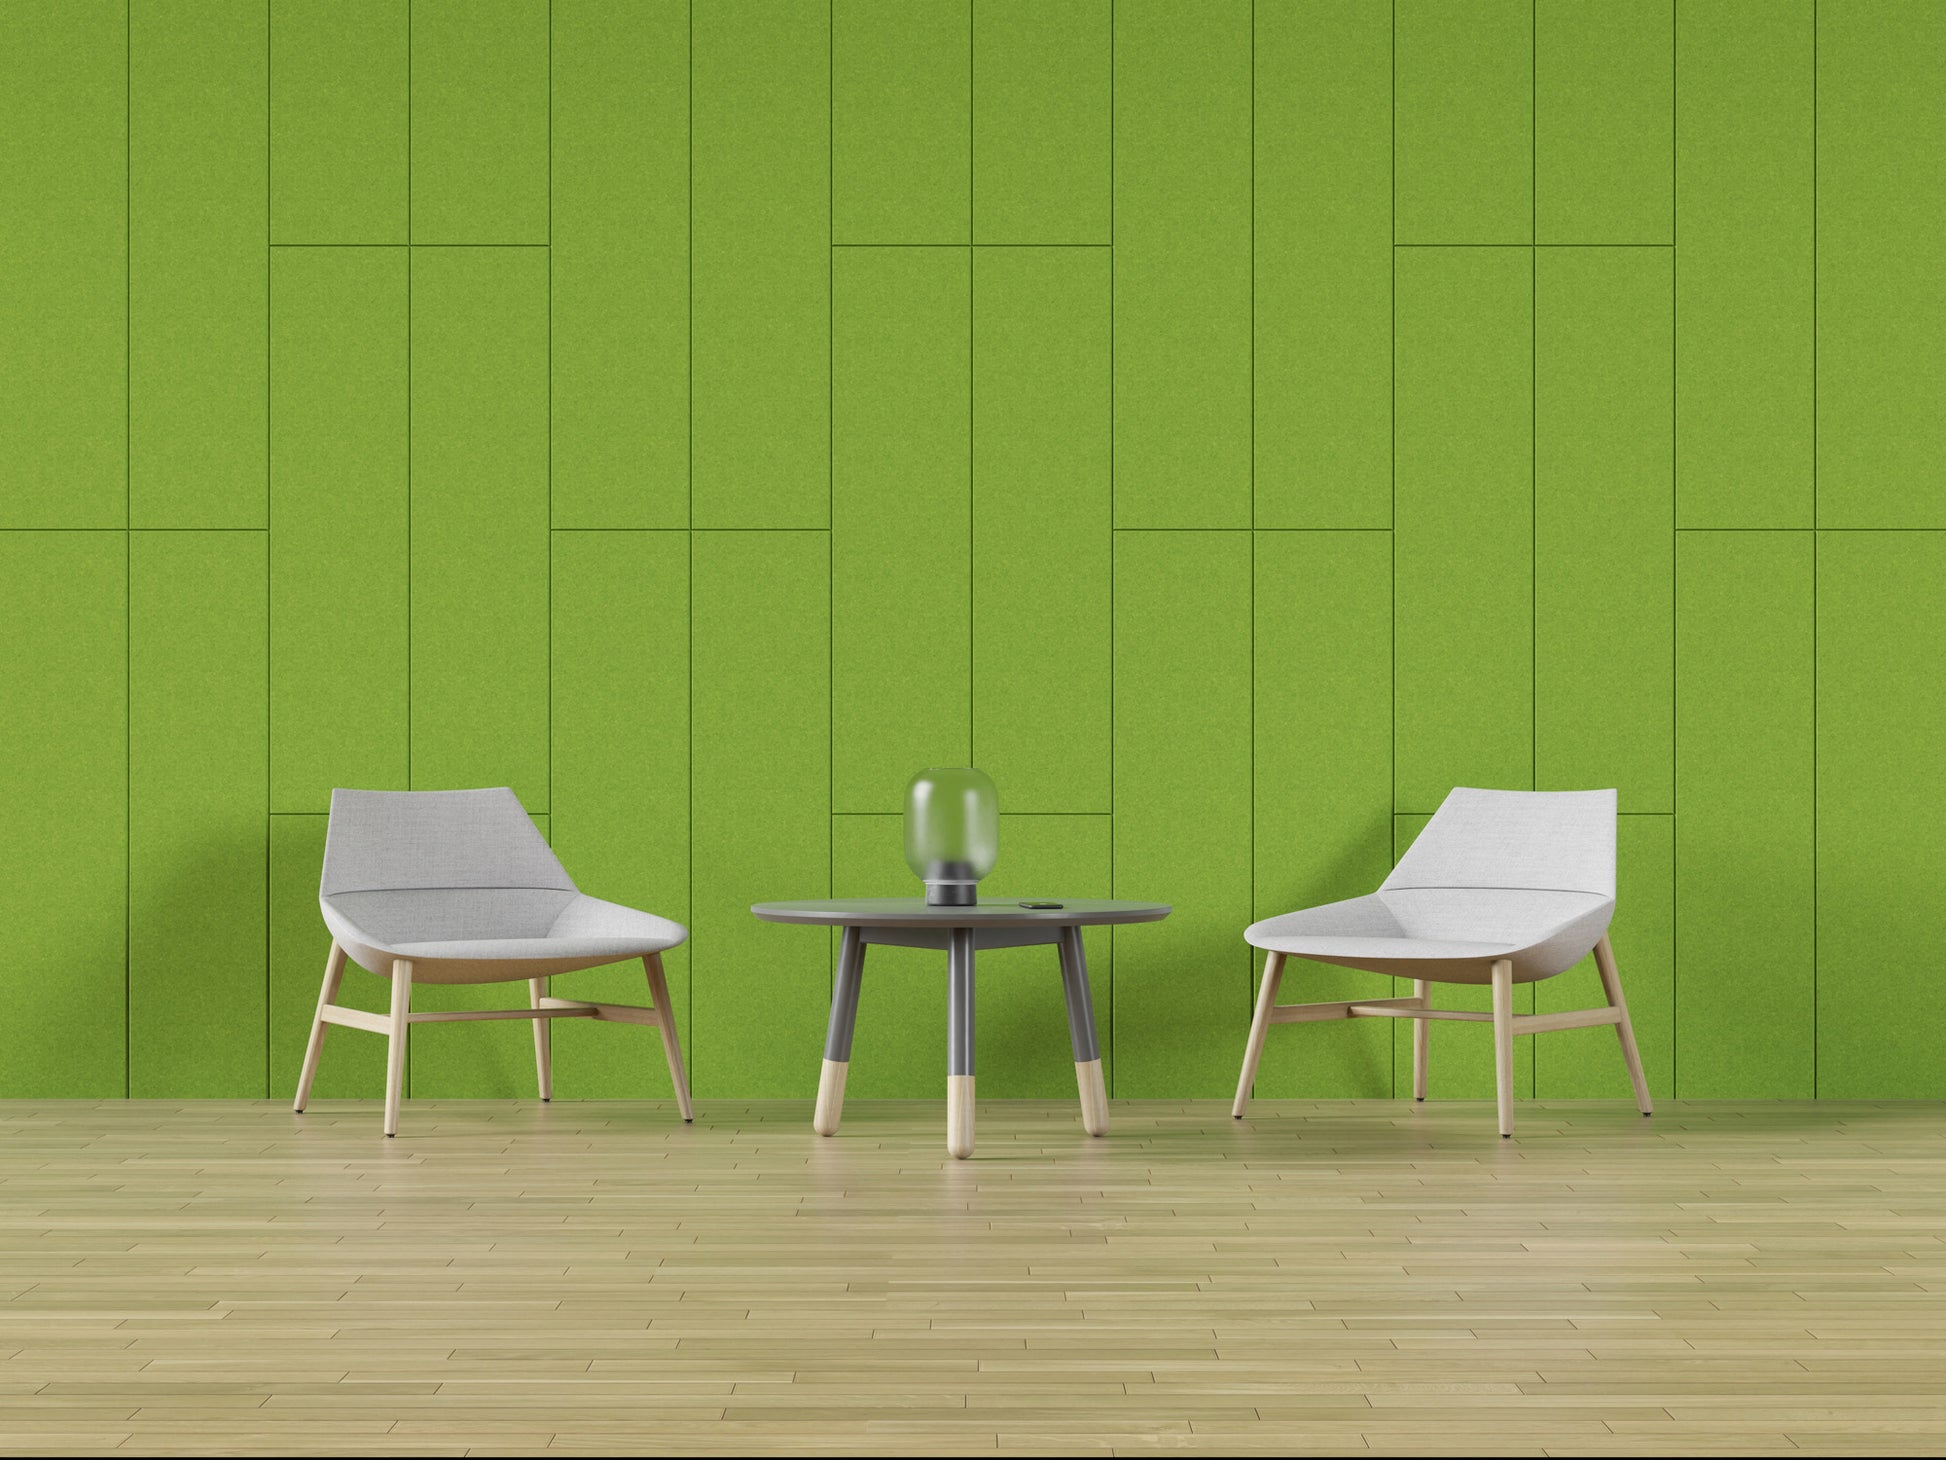 Acoustic felt wall coverings 4'x8' - beveled rectangles - room view render